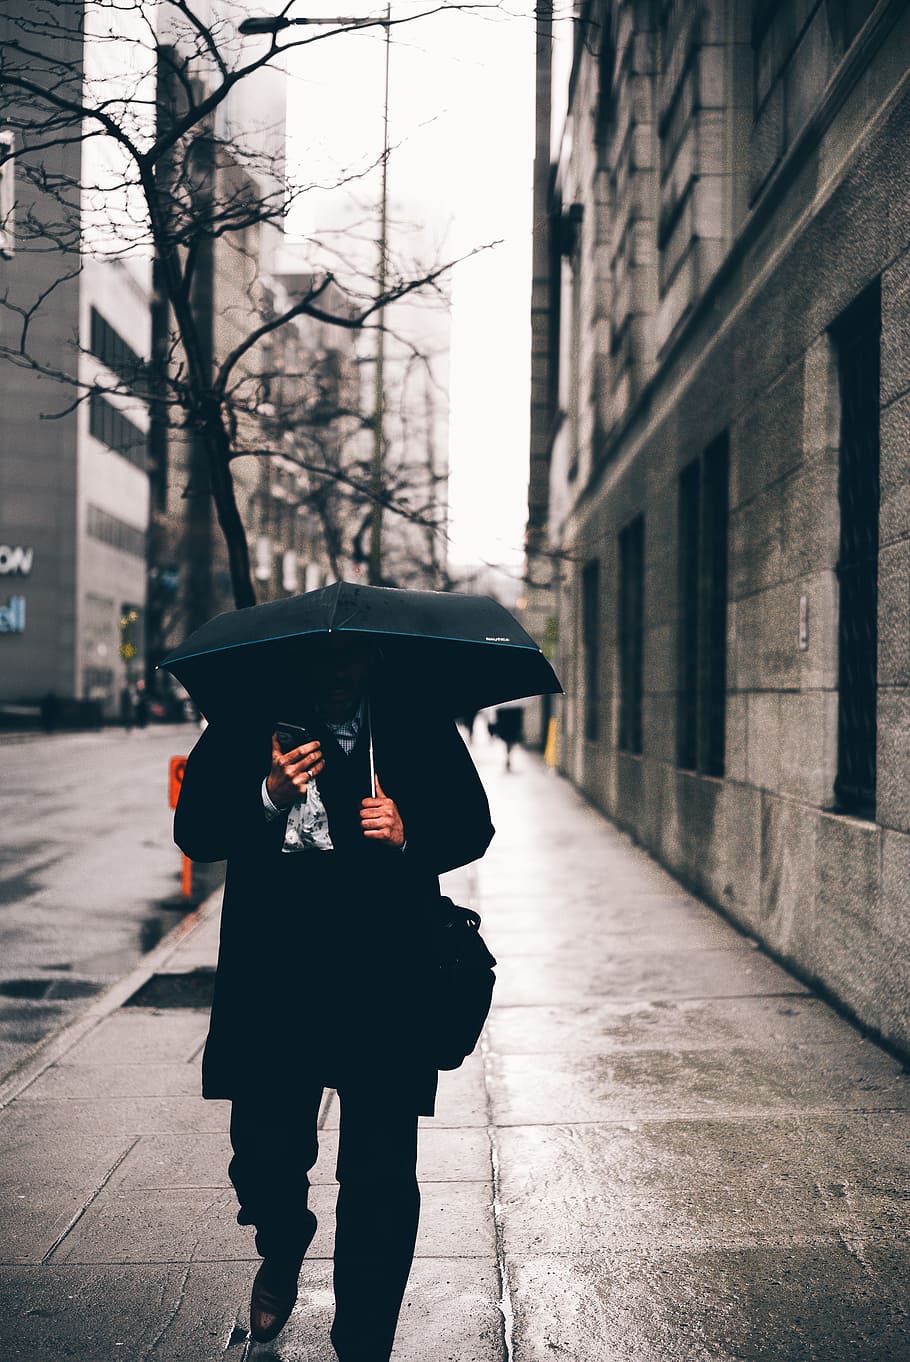 The headless man., person using umbrella and phone while walking on street during daytime, HD wallpaper